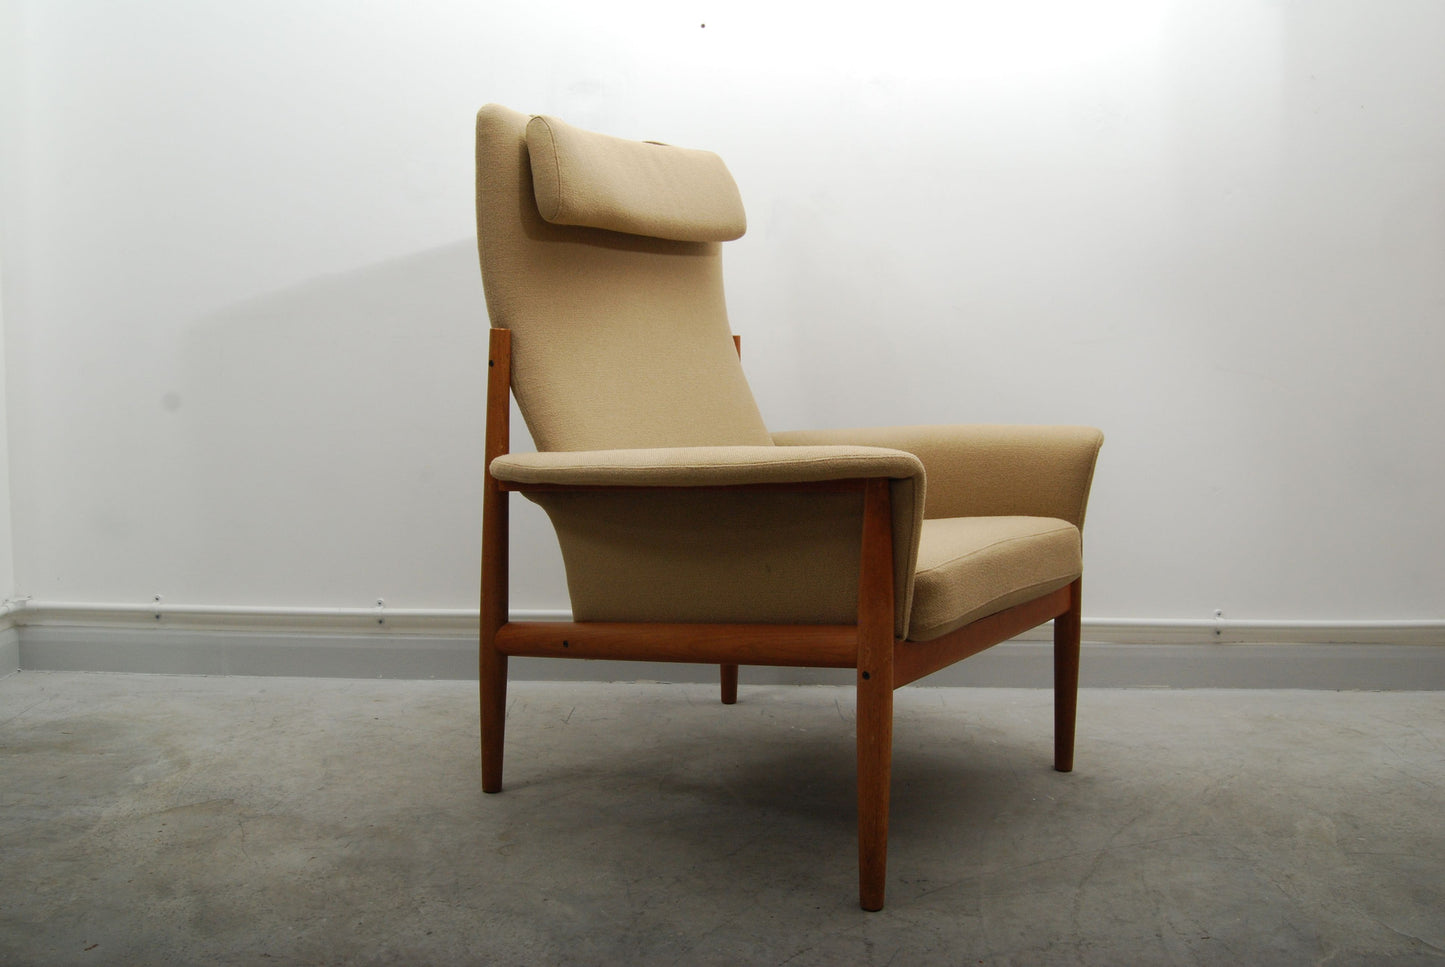 Highback lounge chair by Grete Jalk